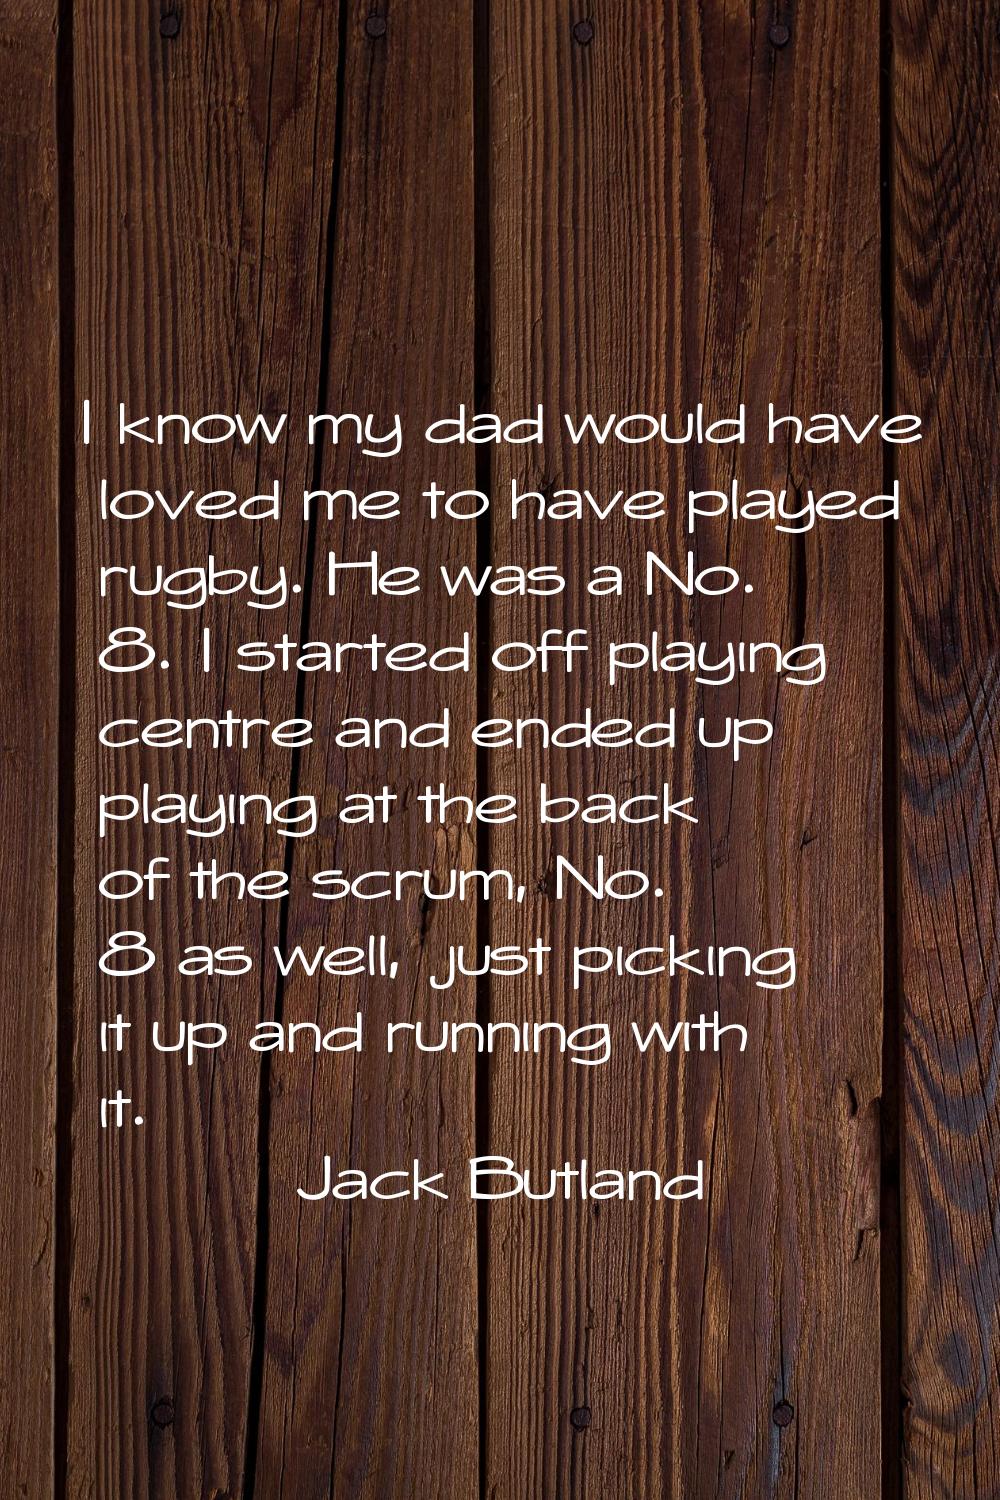 I know my dad would have loved me to have played rugby. He was a No. 8. I started off playing centr